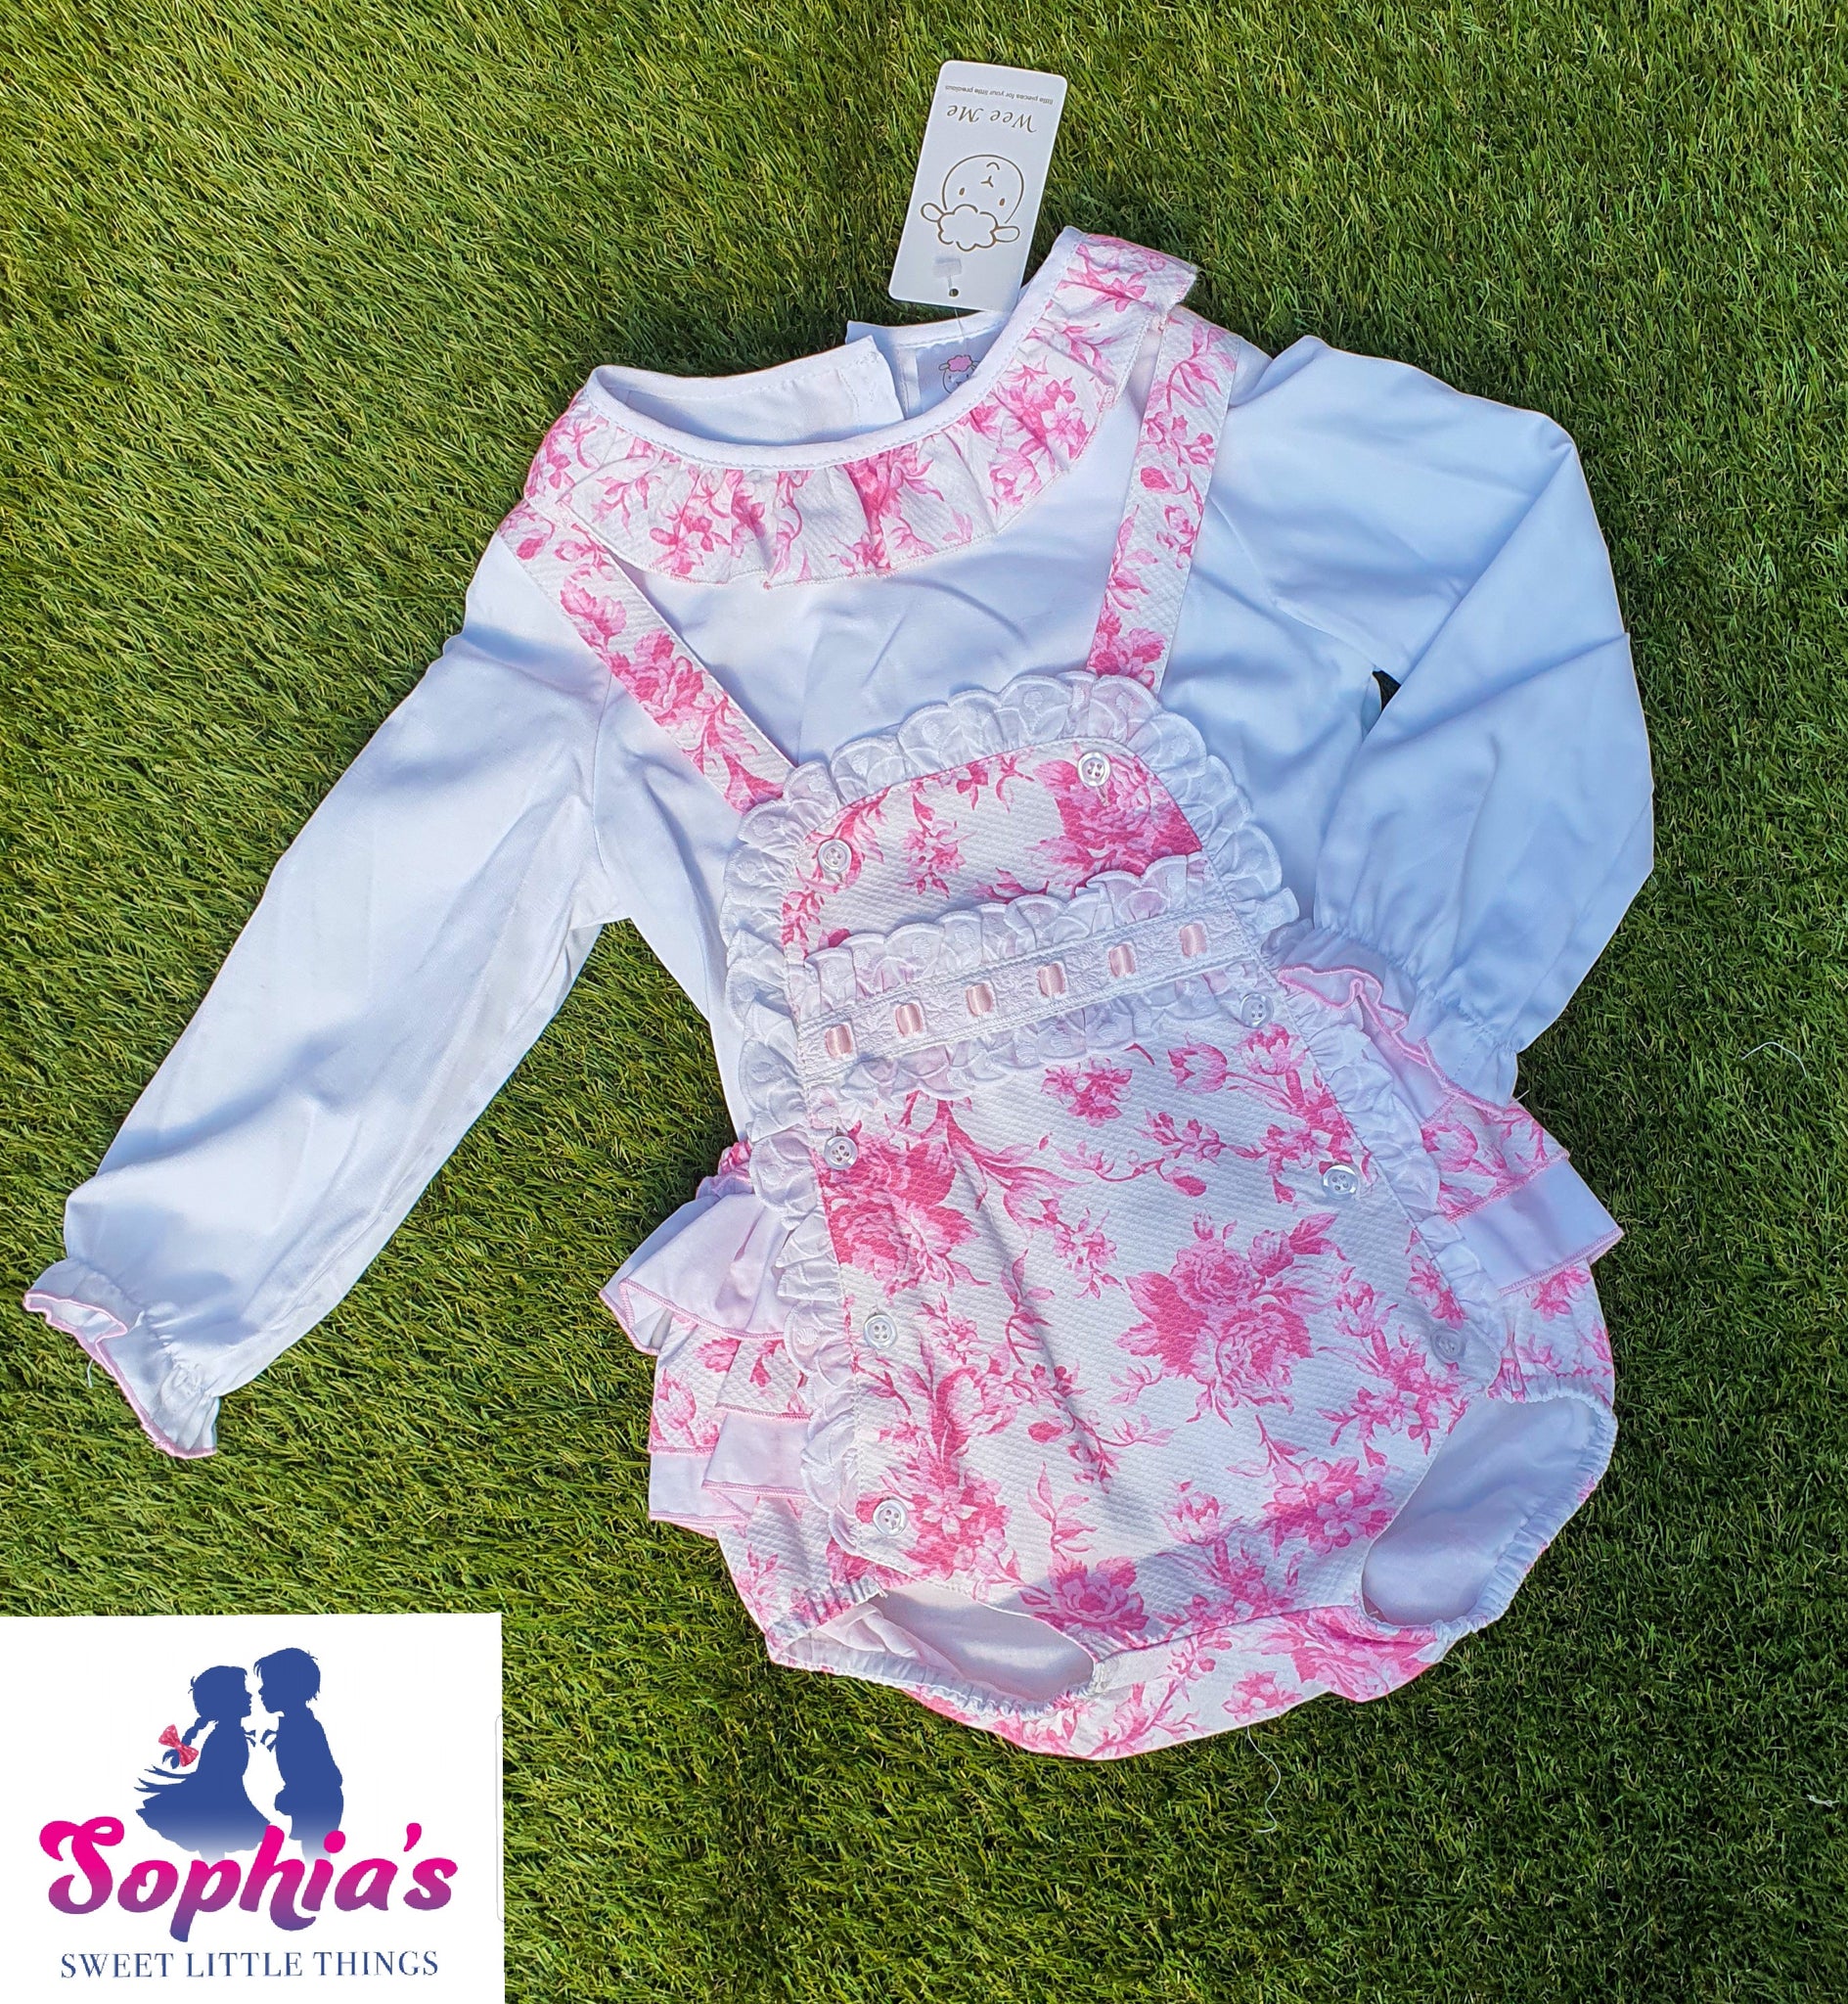 Wee Me frilly bum romper Set